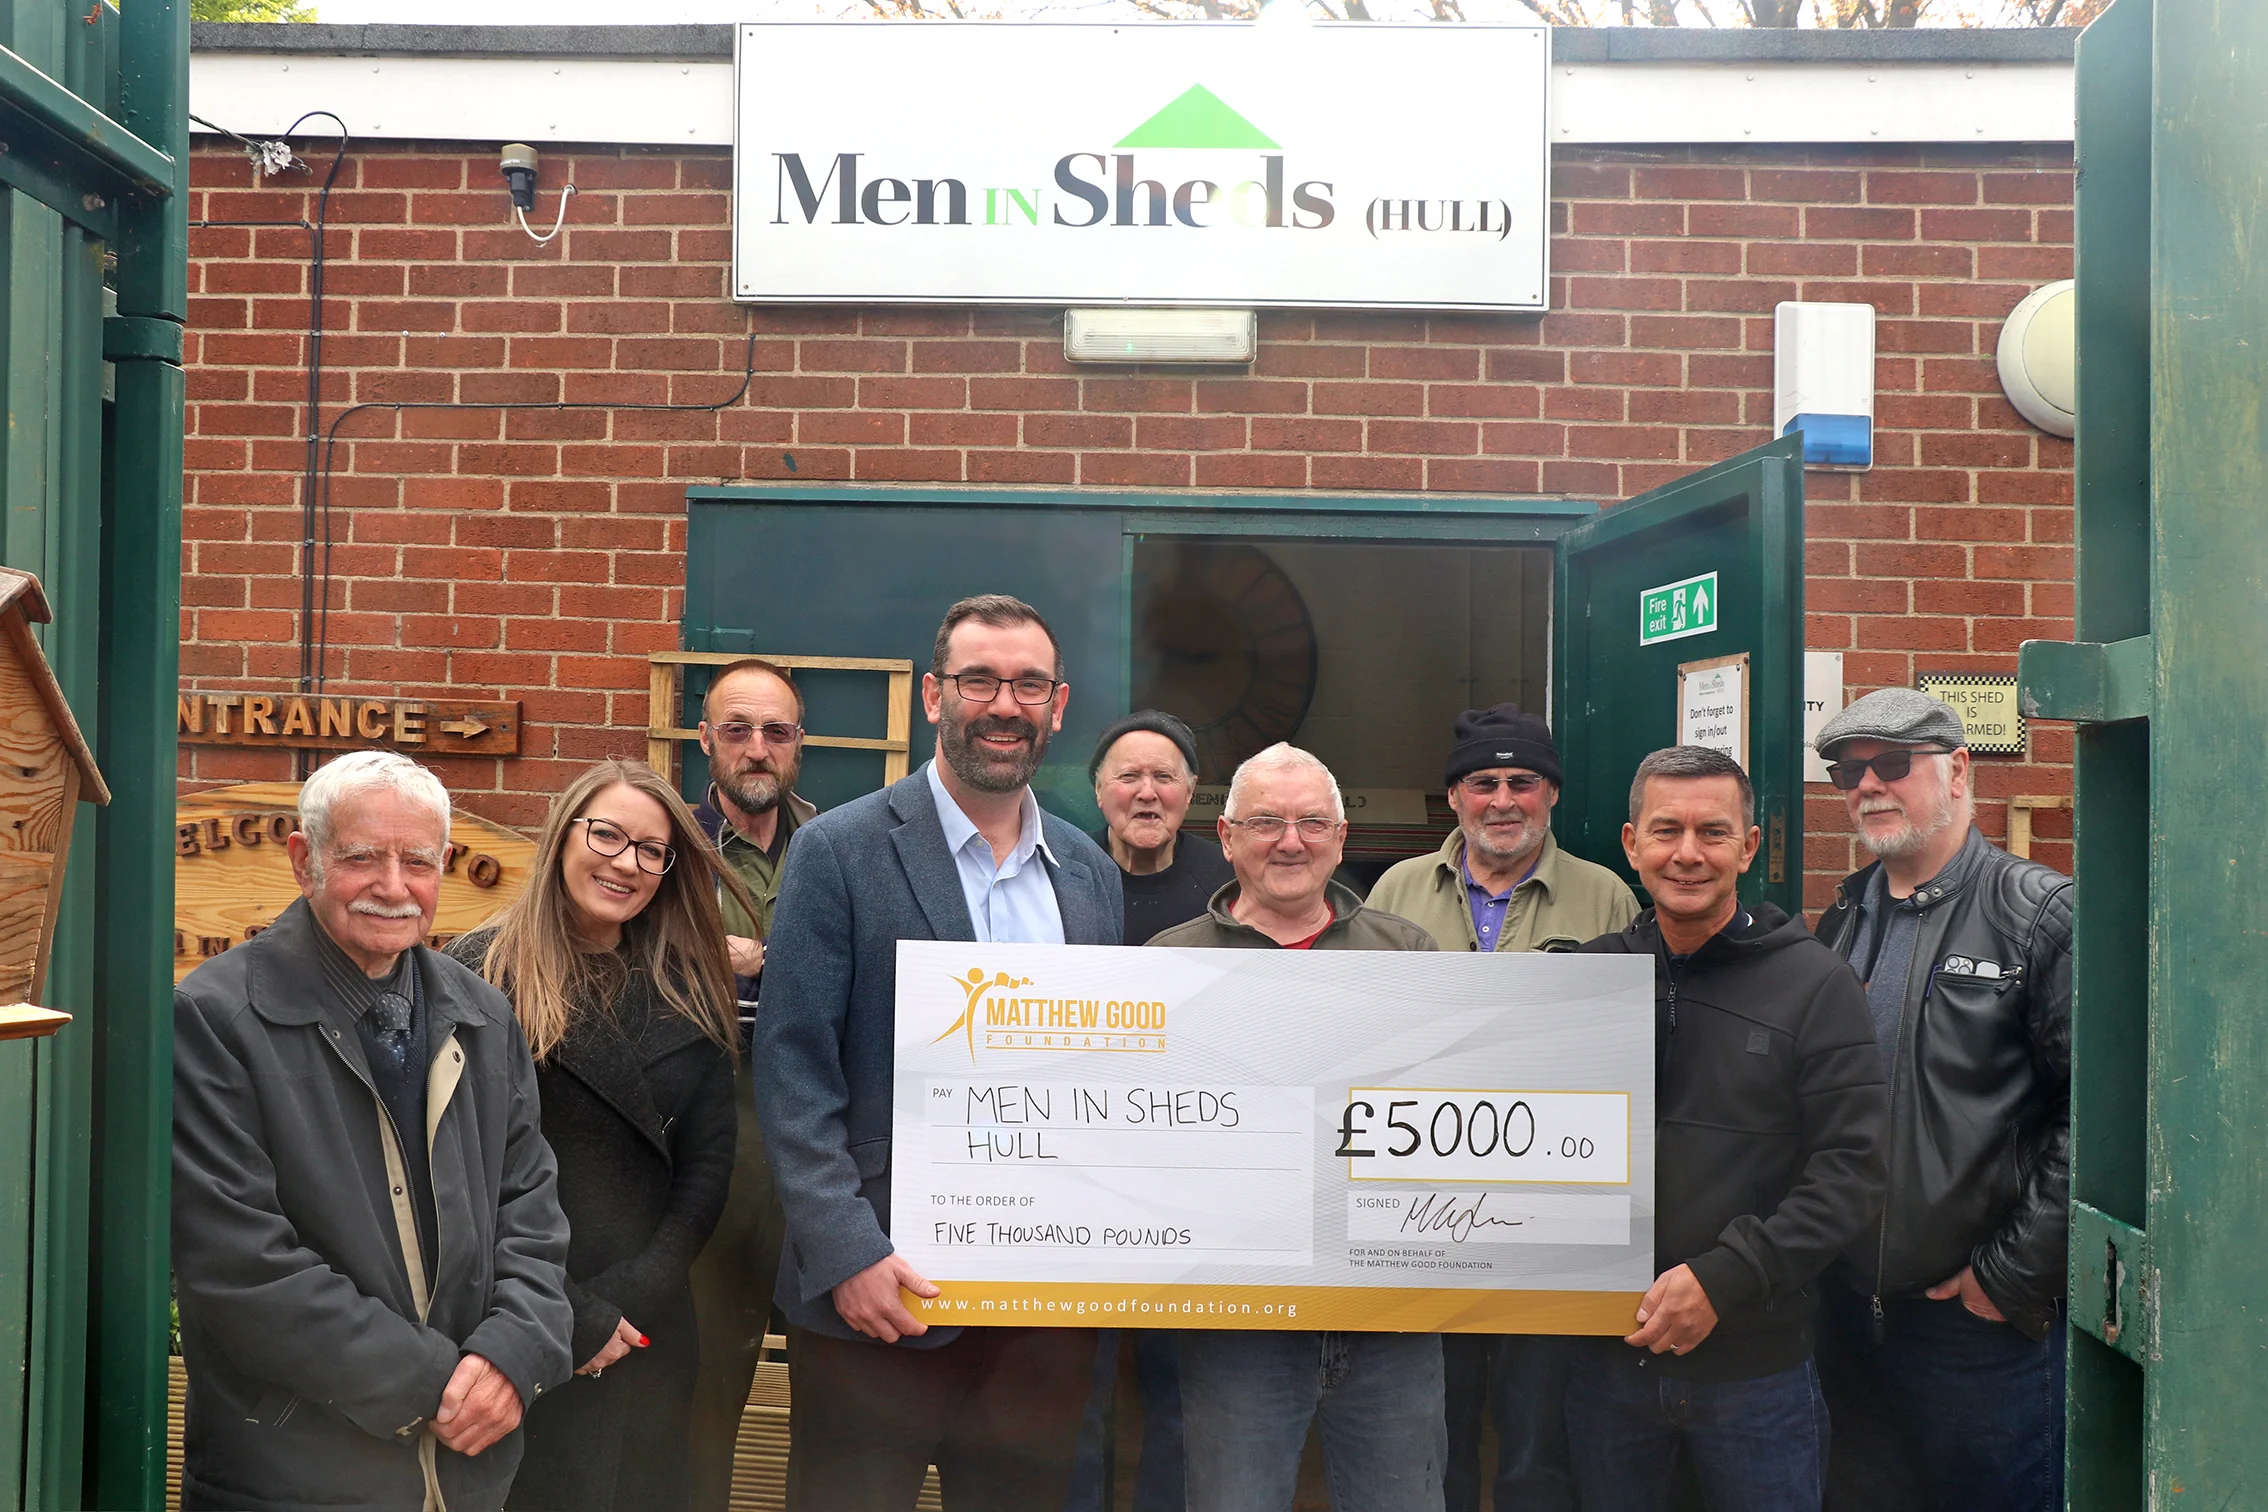 Adam Walsh, CEO of John Good group and Michelle Taft, Executive Director of The Matthew Good Foundation hand over a cheque for £5,000 to Nick Todd - manager of Men in Sheds Hull. a group of service users are standing behind them